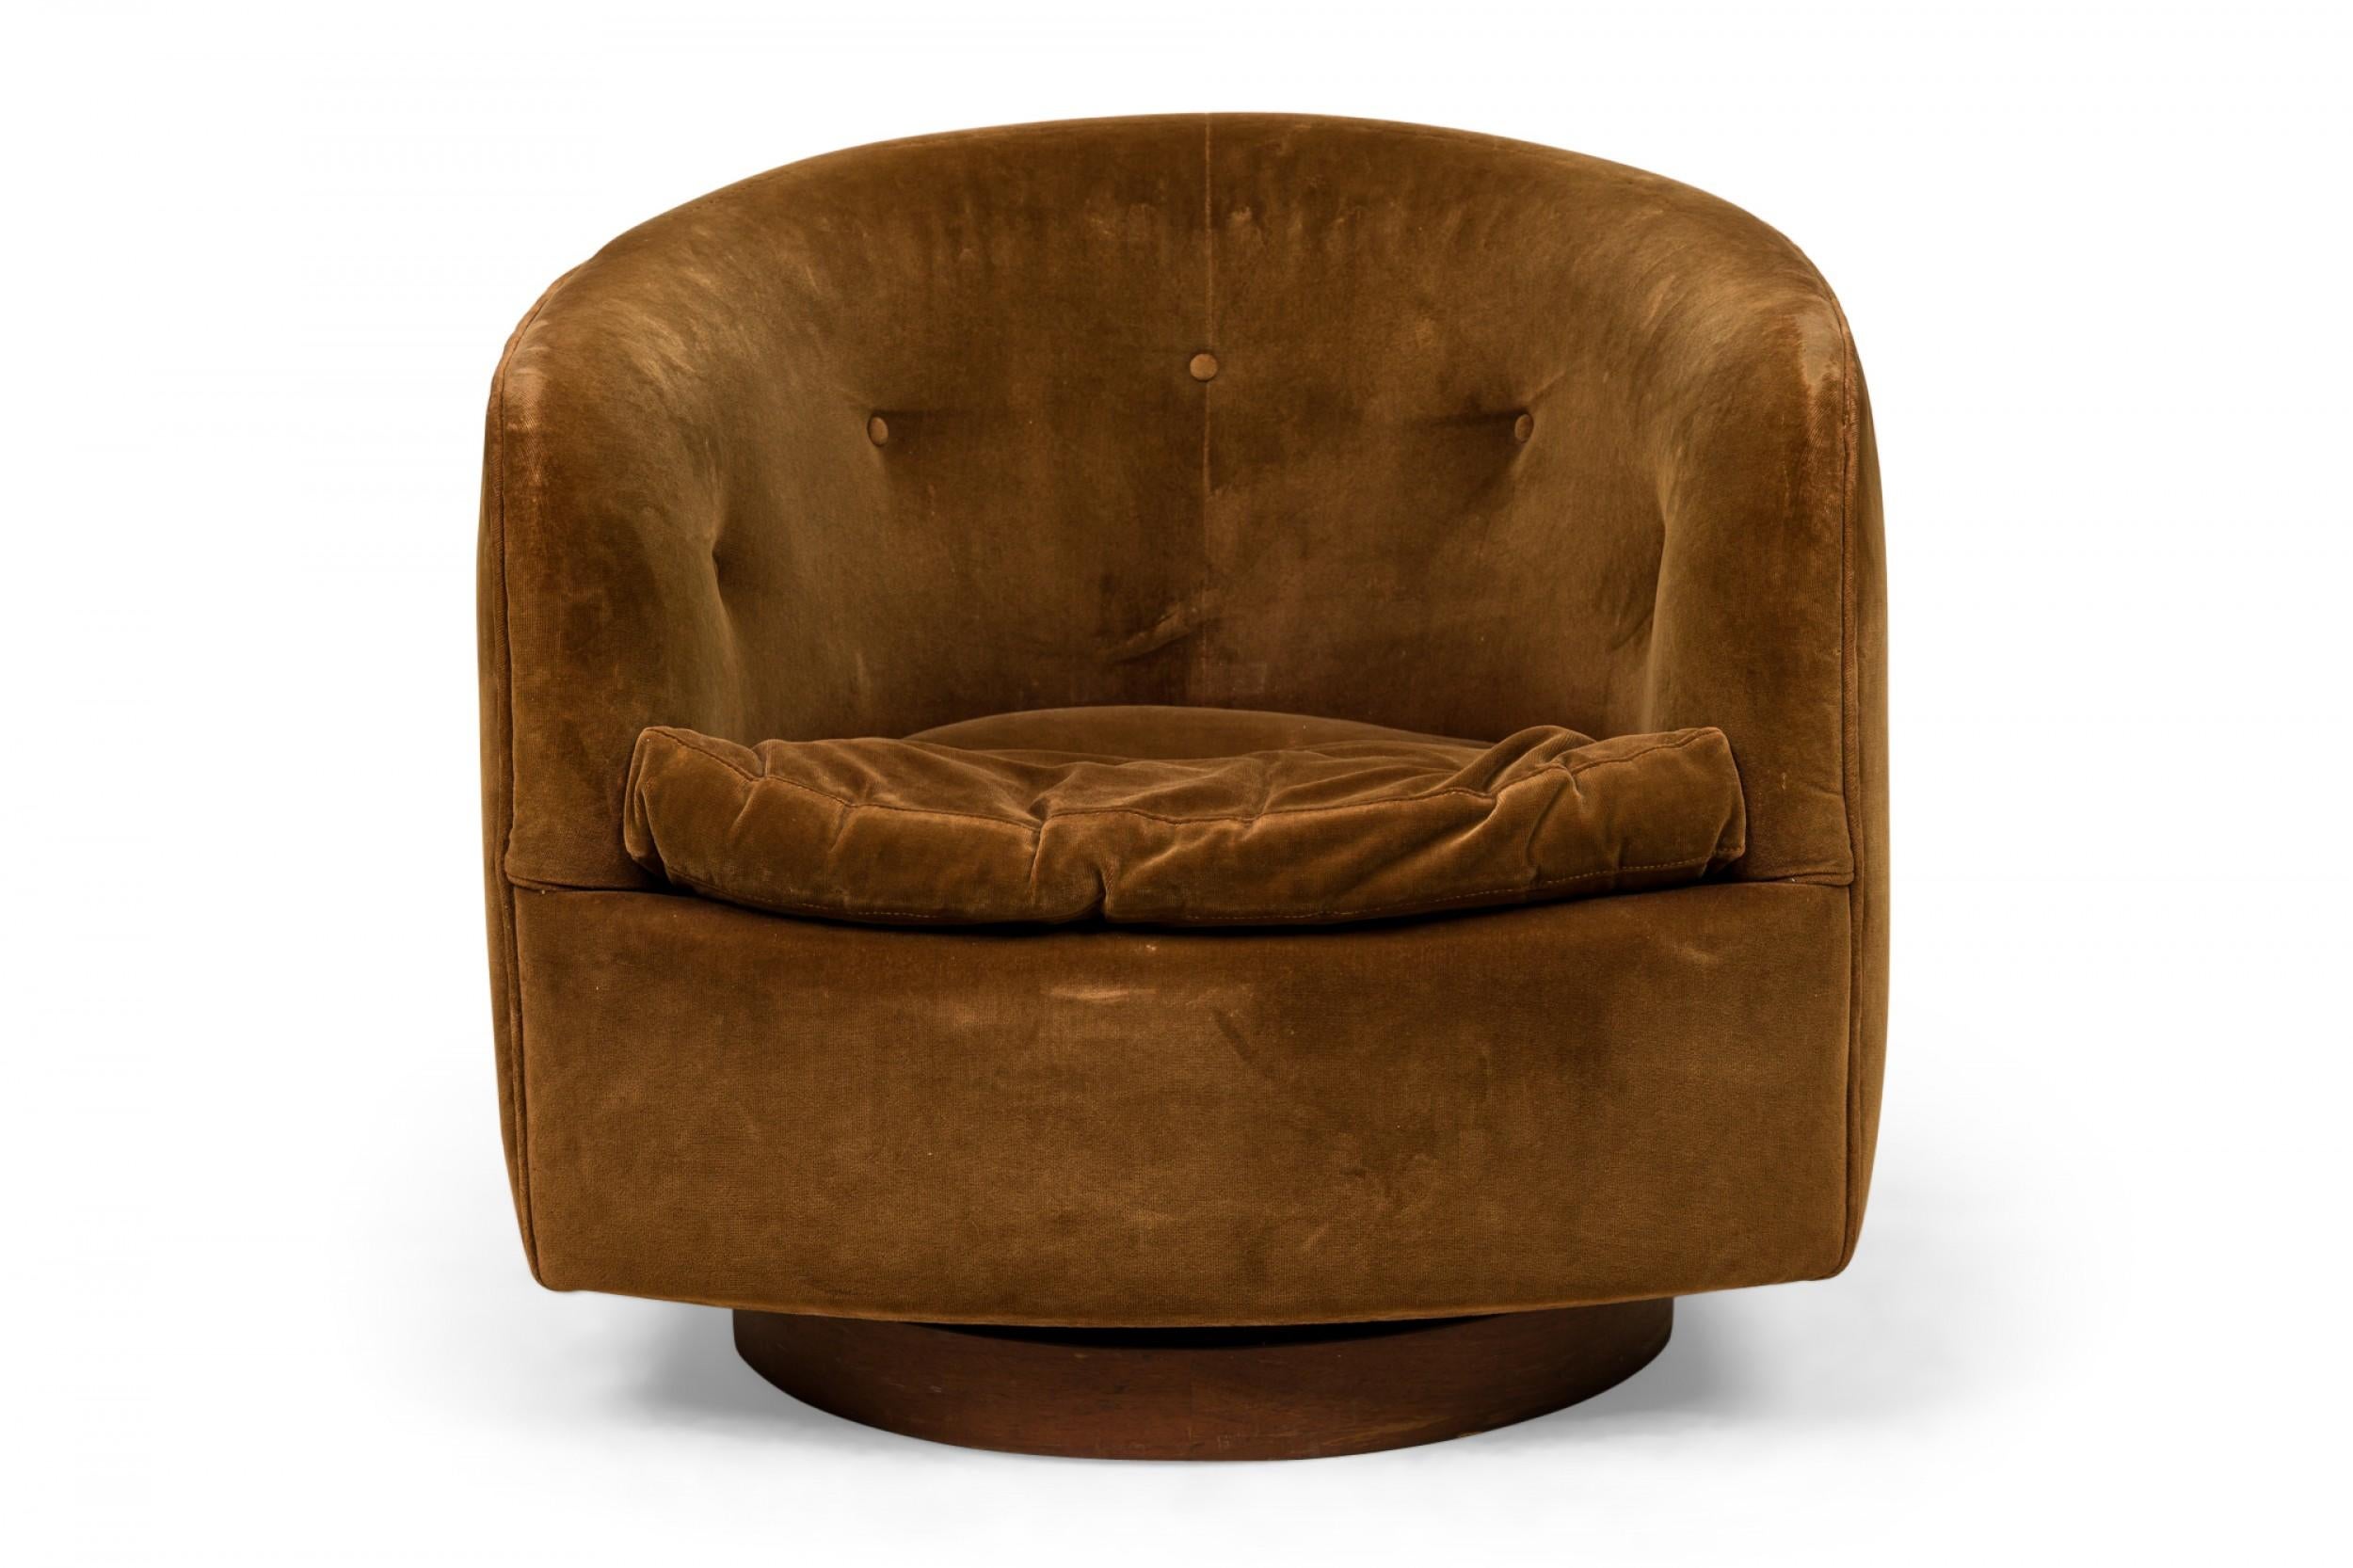 American Mid-Century horseshoe-form lounge / armchair upholstered in brown velour with button tufting, resting on a circular wood veneer plinth base. (MILO BAUGHMAN FOR THAYER COGGIN)(Similar piece: DUF0616, DUF0617)
